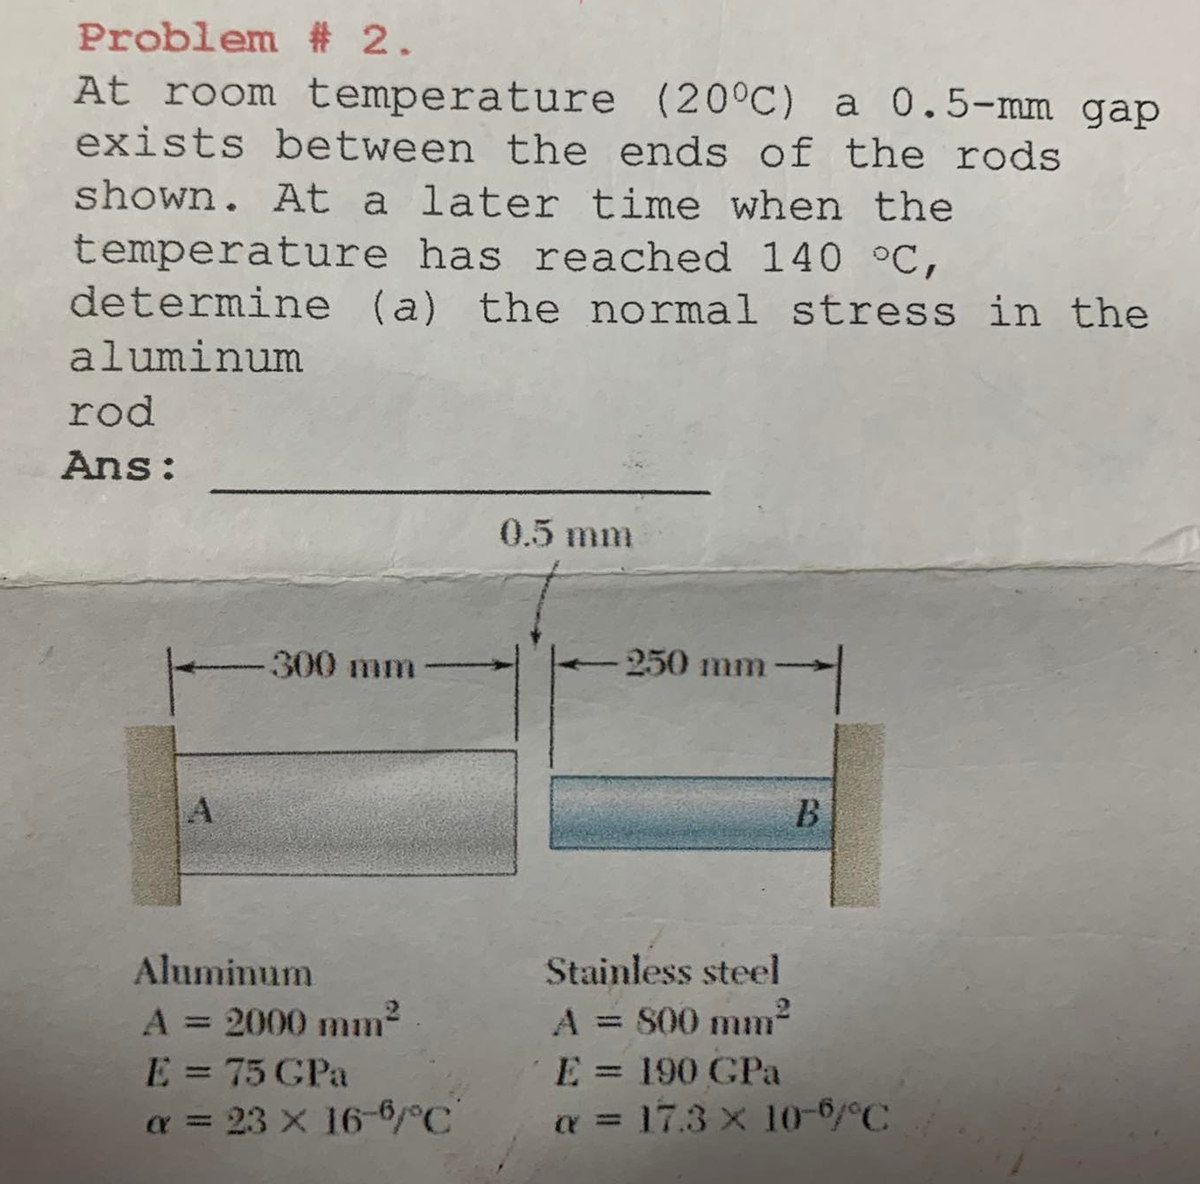 Problem
# 2.
At room temperature
(20°C) a 0.5-mm gap
exists between the ends of the rods
shown. At a later time when the
temperature has reached 140 °C,
determine (a) the normal stress in the
aluminum
rod
Ans:
A
-300 mm
Aluminum
A = 2000 mm²
E = 75 GPa
α = 23 x 16-6/°C
0.5 mm
-250 mm
Stainless steel
A = 800 mm²
B
E = 190 GPa
a = 17.3 x 10-6/°C